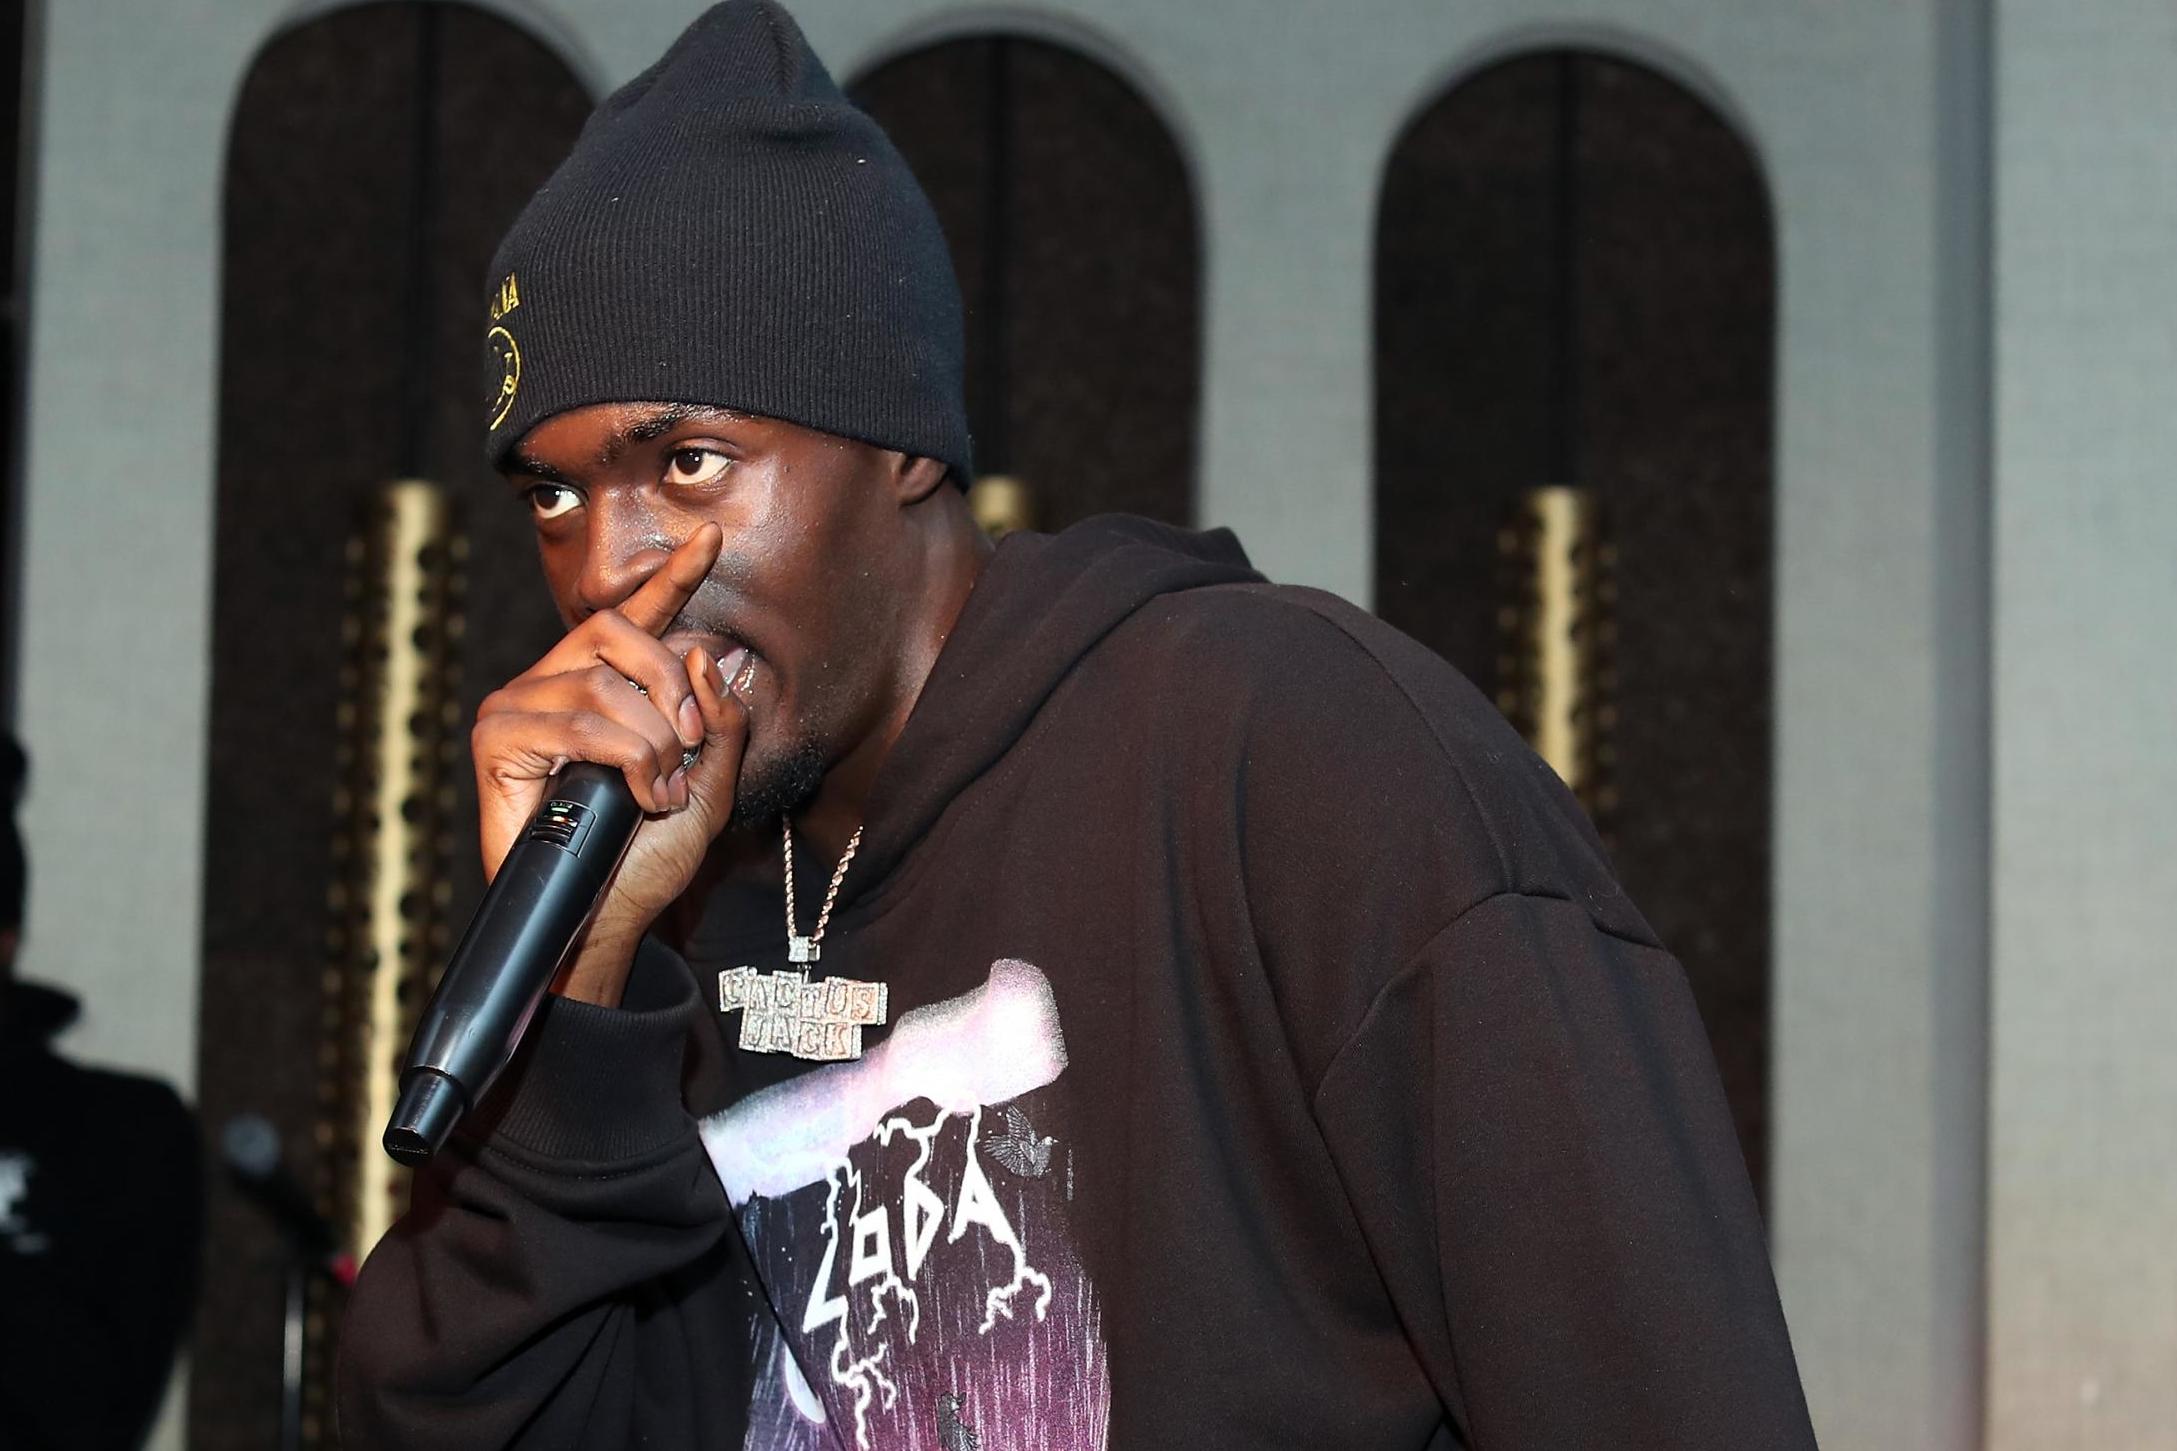 Sheck Wes performs at LiveXLive Post Grammy Party at The Peppermint Club on 10 February, 2019 in Los Angeles, California.